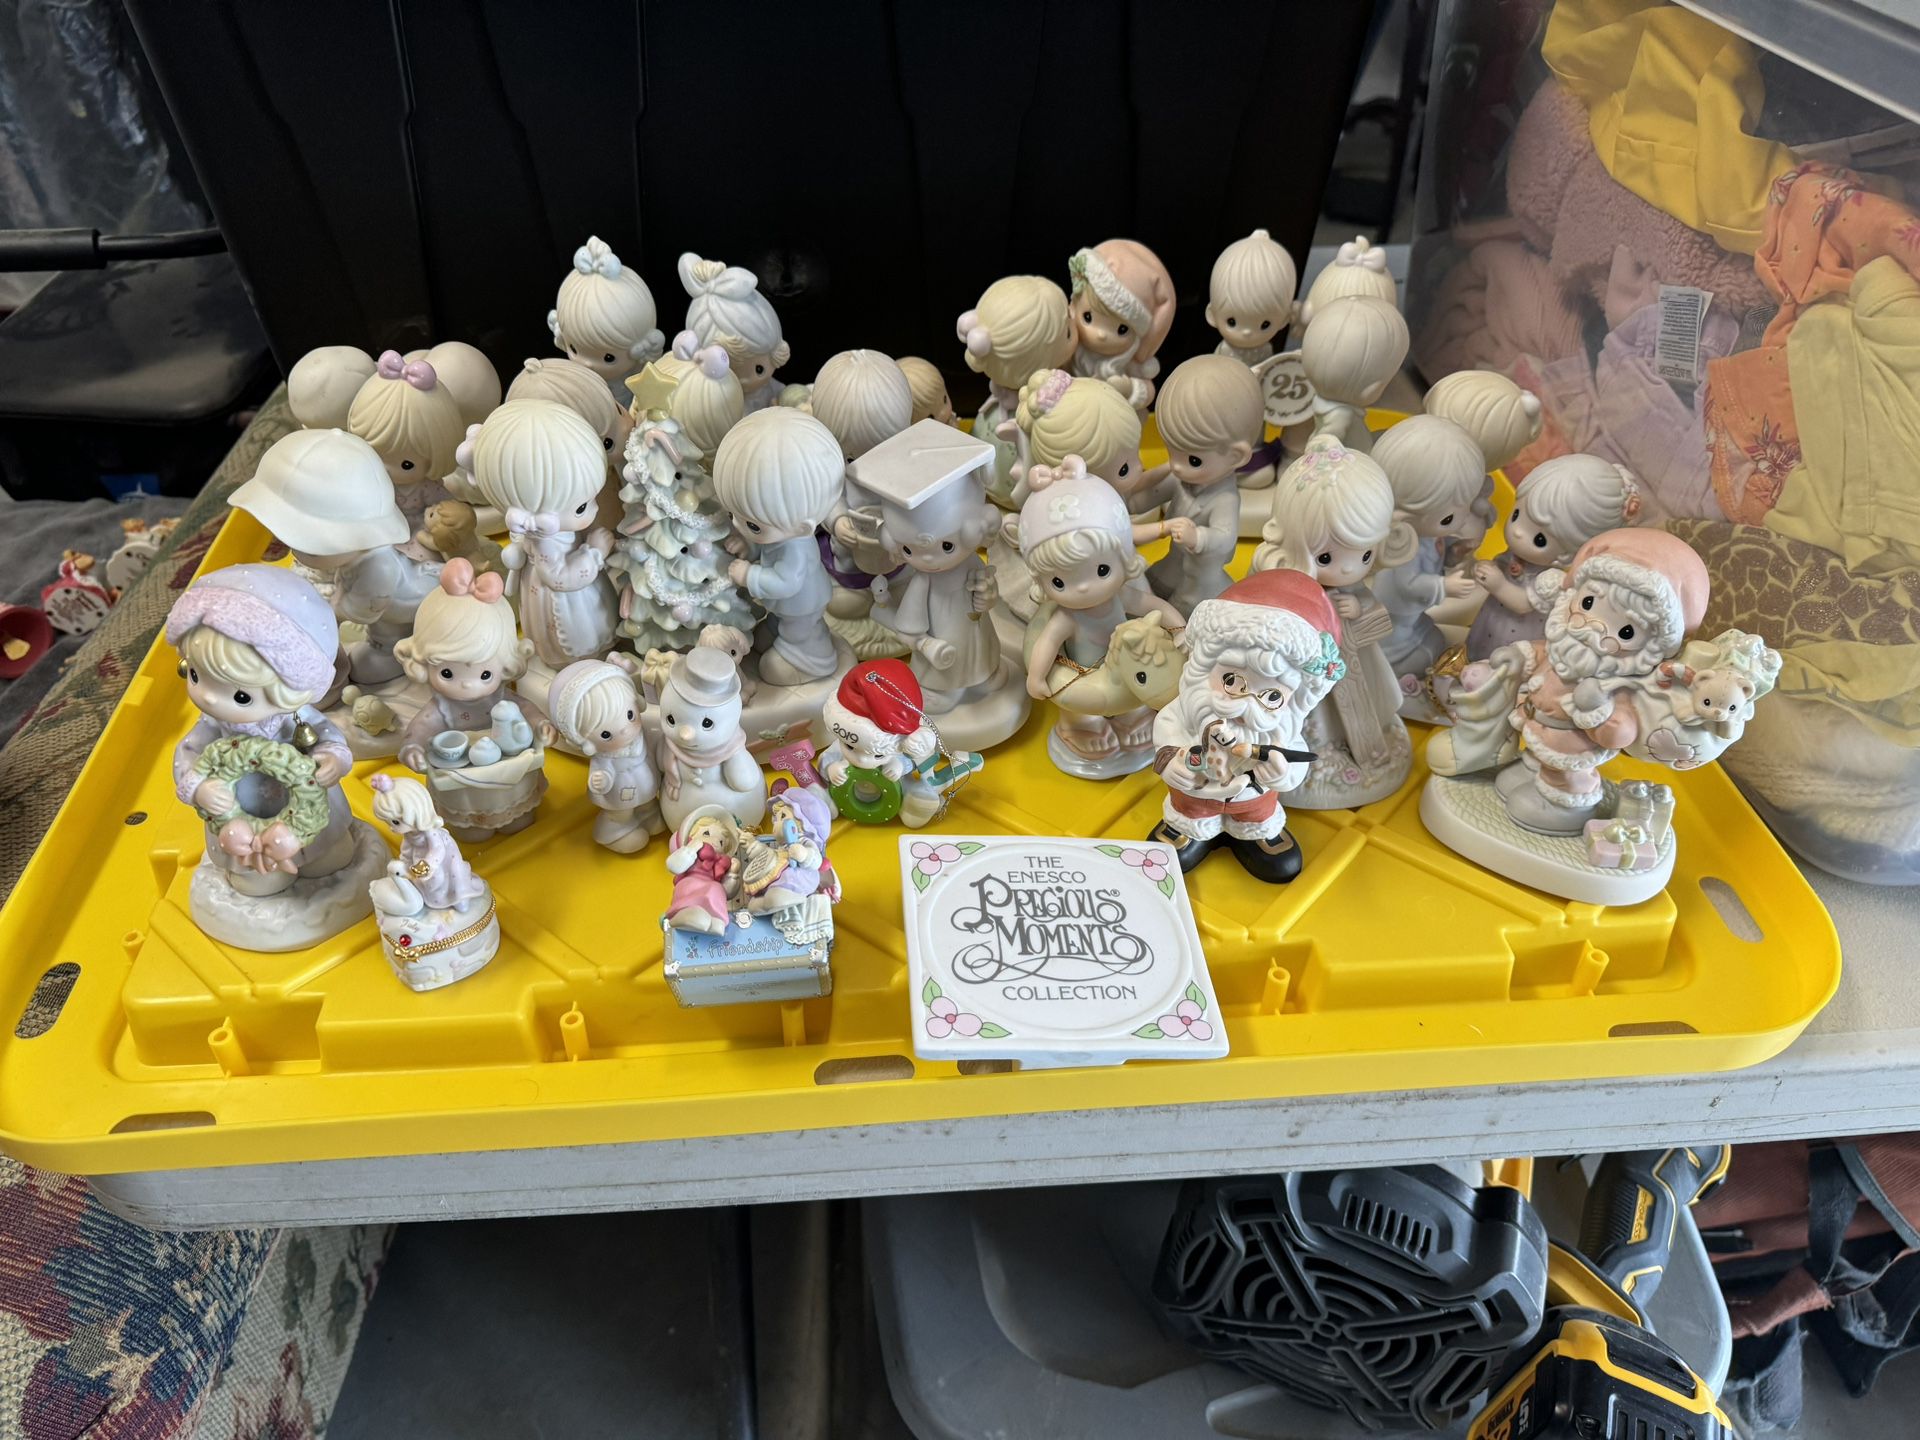 Lot Of 28 Vintage Precious Moments Figurines